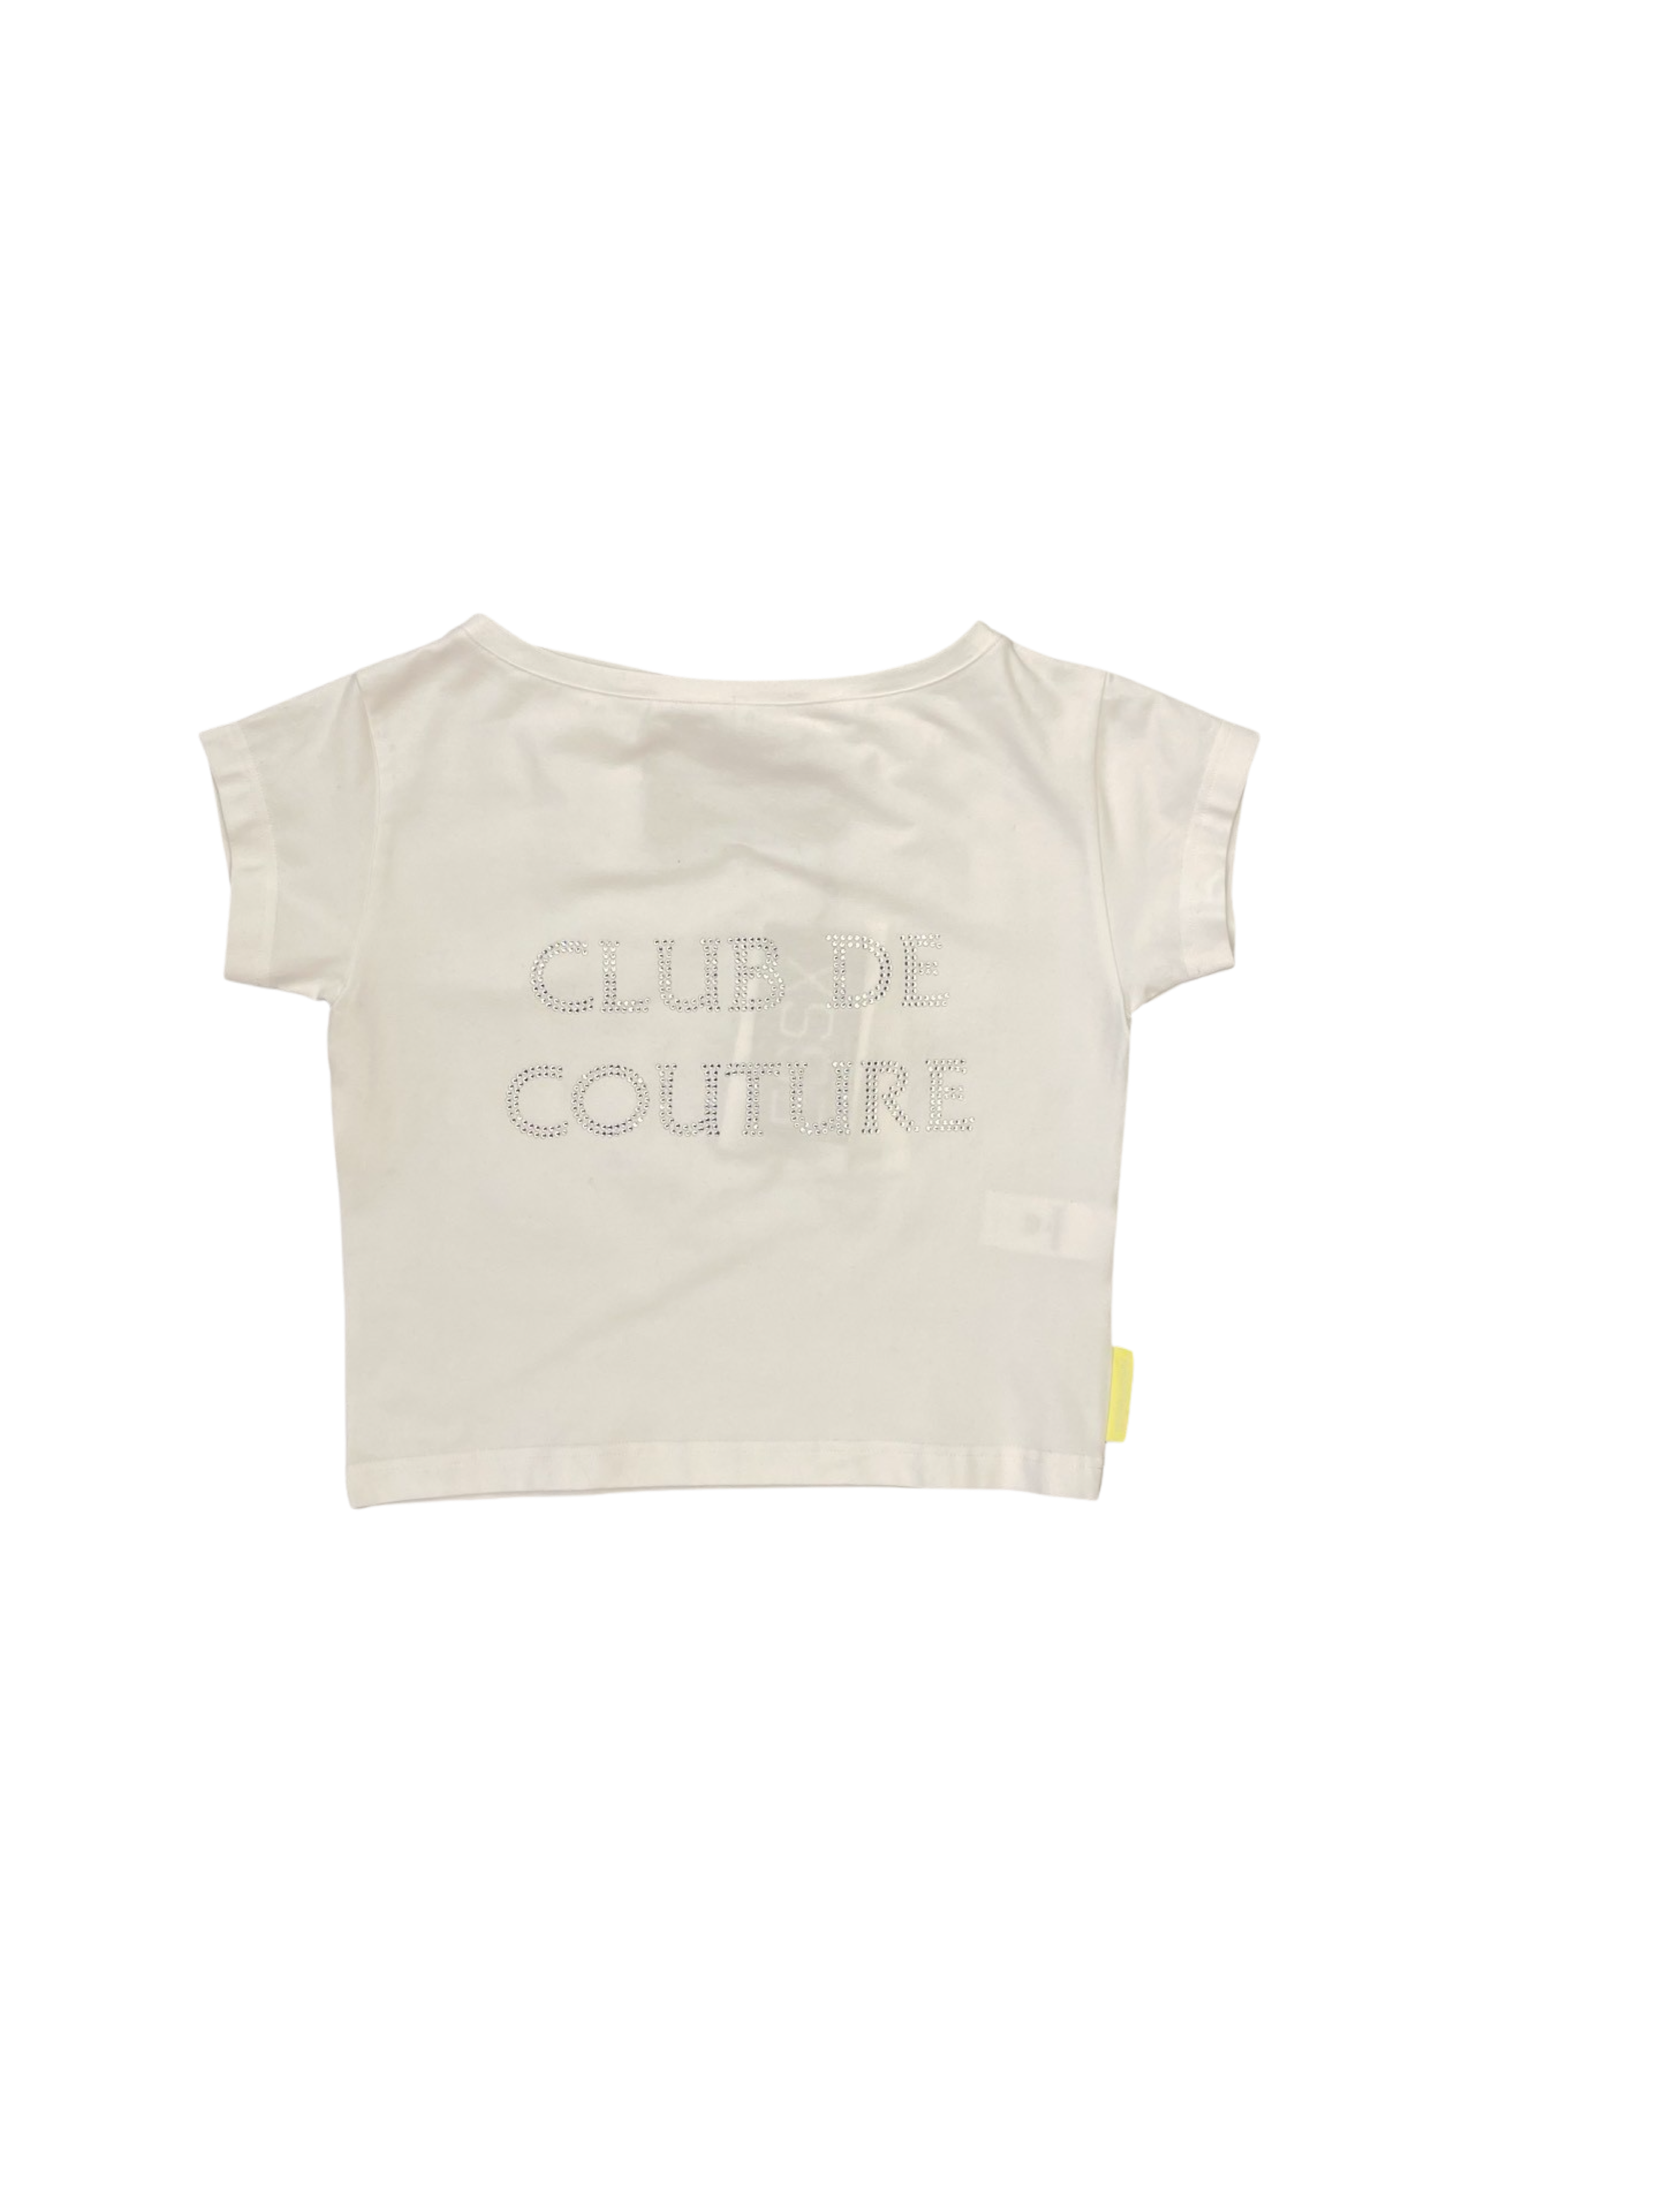 ANONYMOUS CLUB DE COUTURE BABY TEE WHITE